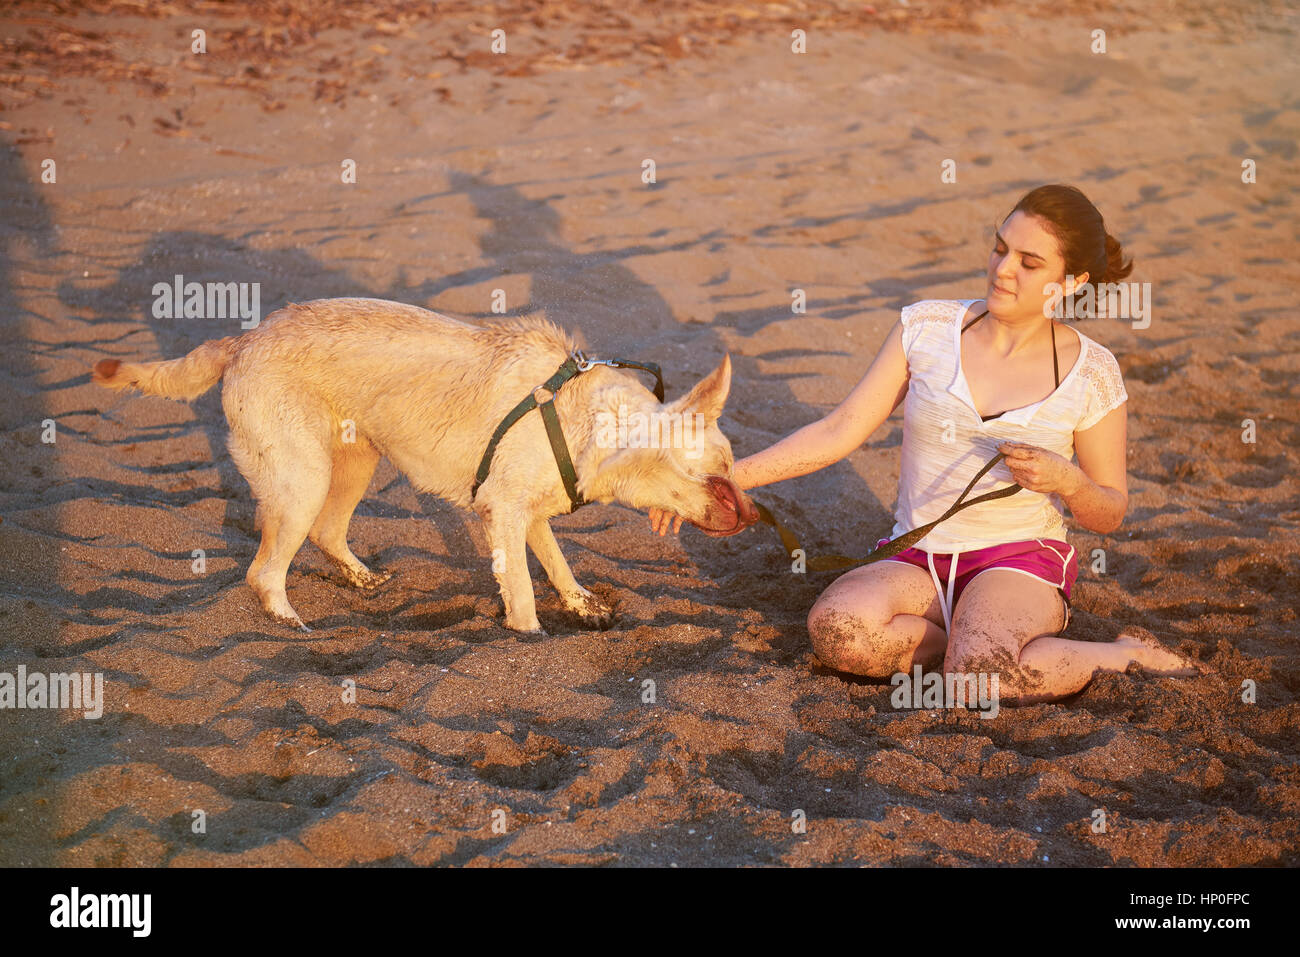 Wet labrador shaking on beach with young woman friend Stock Photo